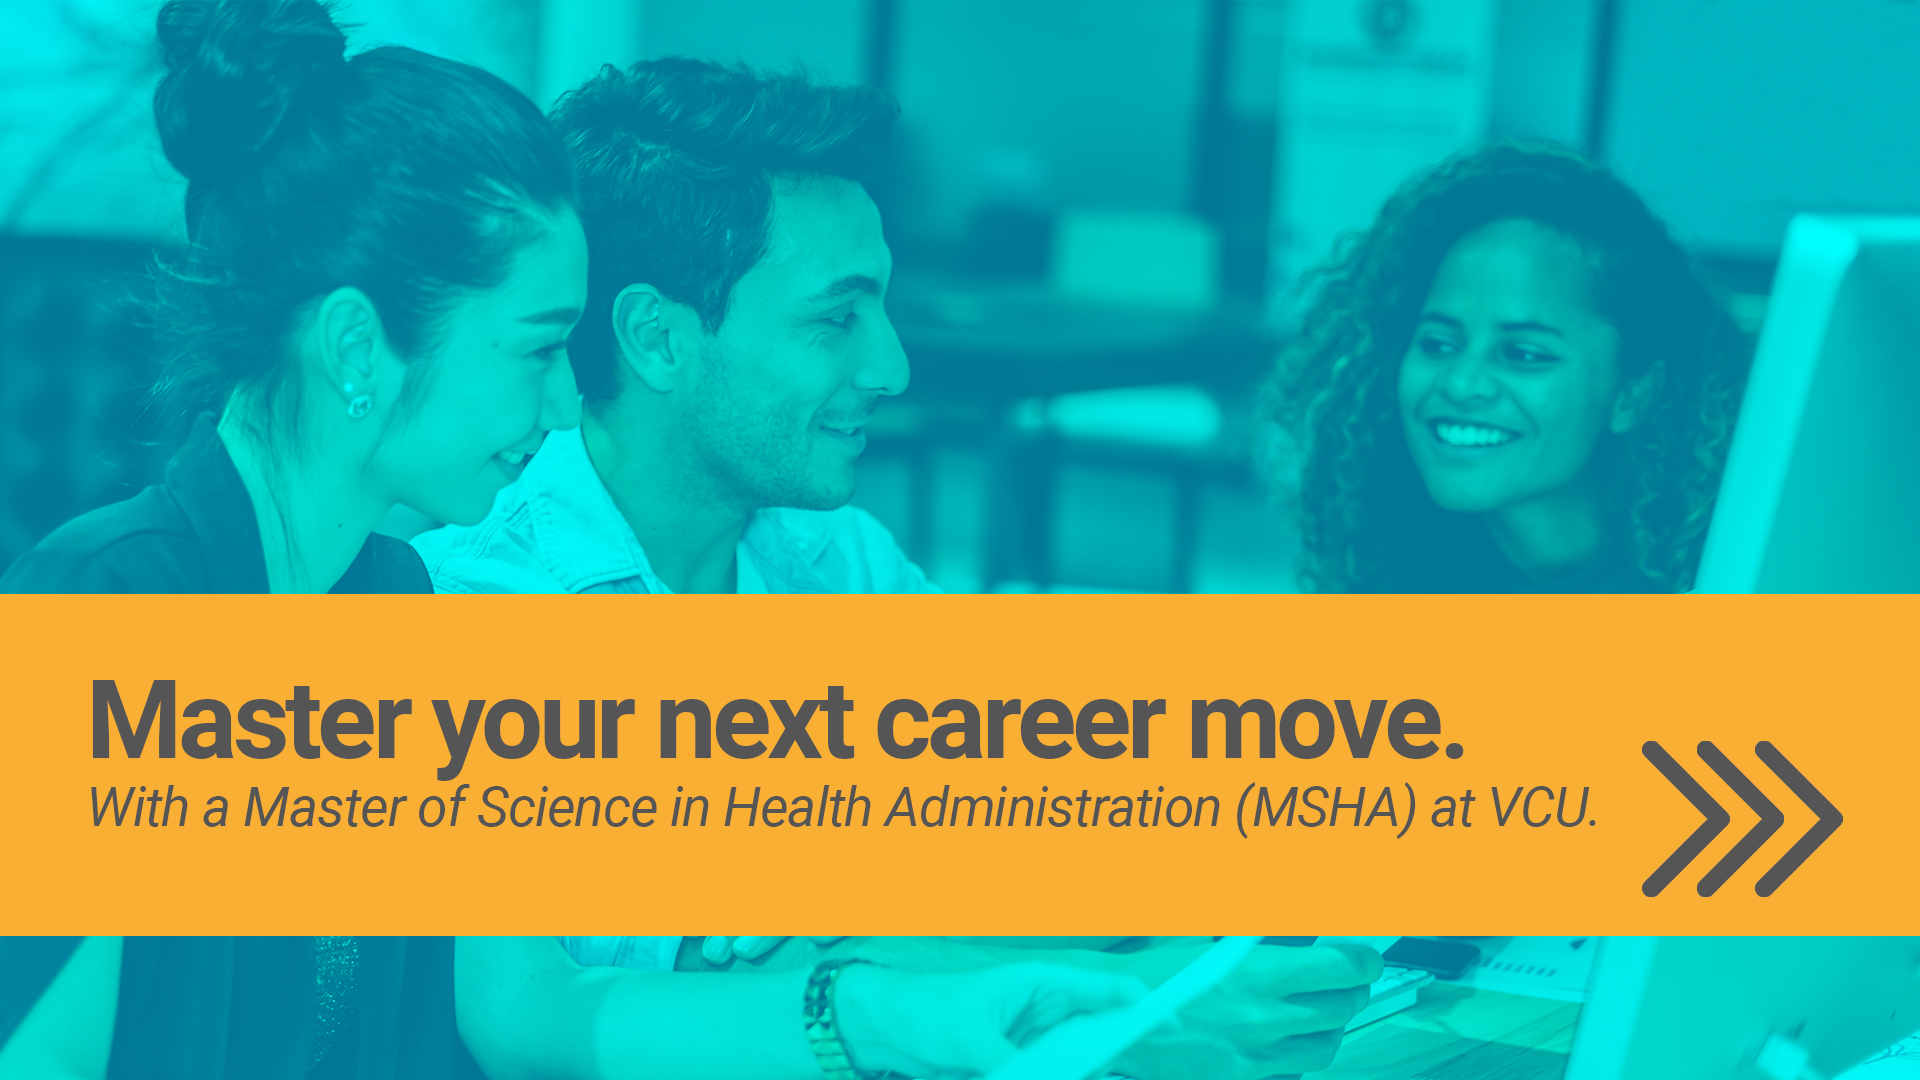 Master your next career move. With a Master of Science in Health Administration (MSHA) at VCU.